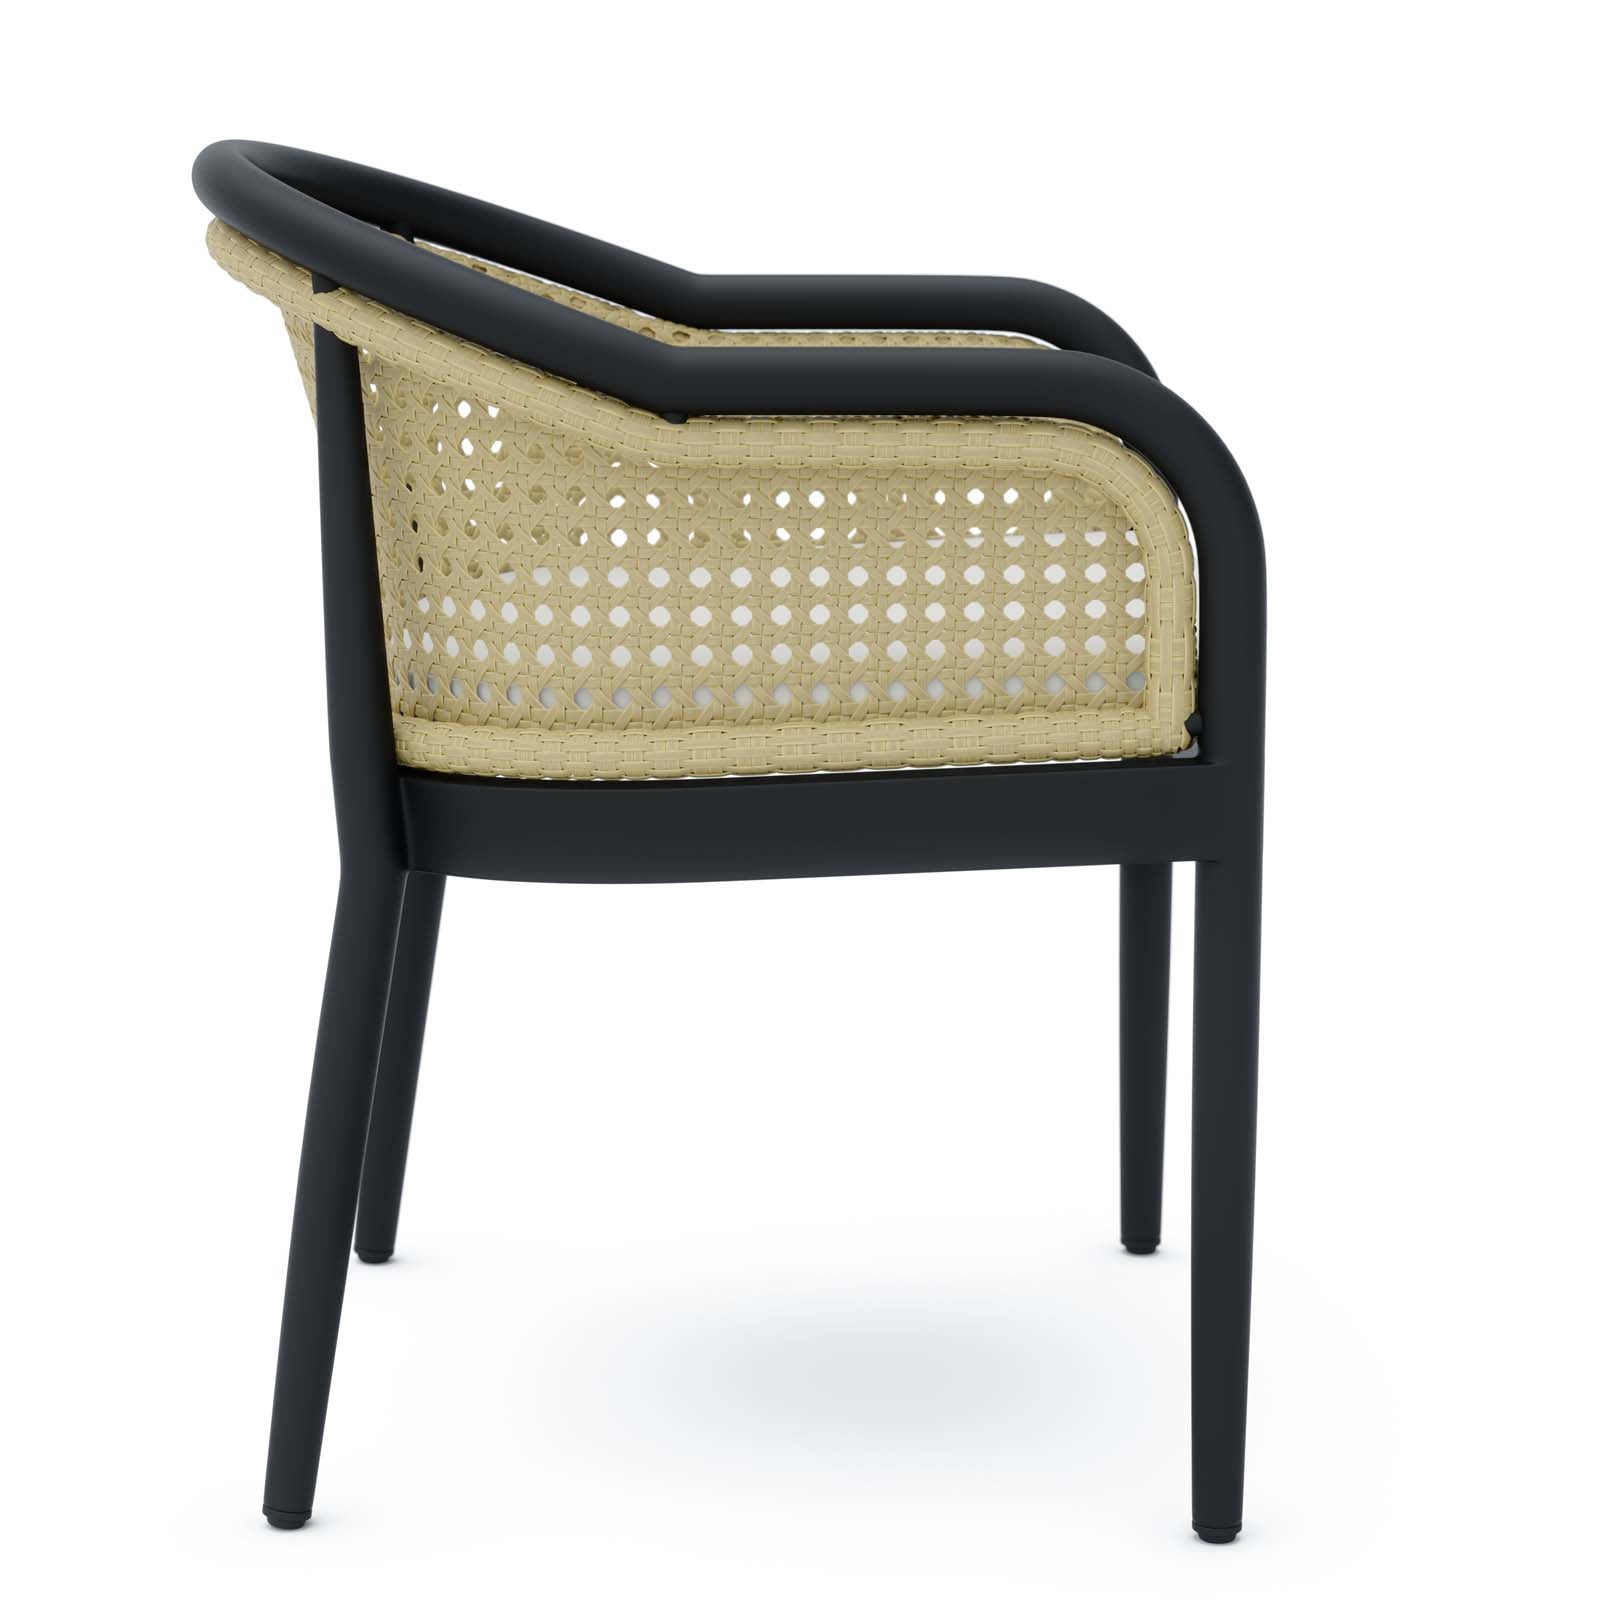 Melbourne Outdoor Patio Dining Armchair - East Shore Modern Home Furnishings